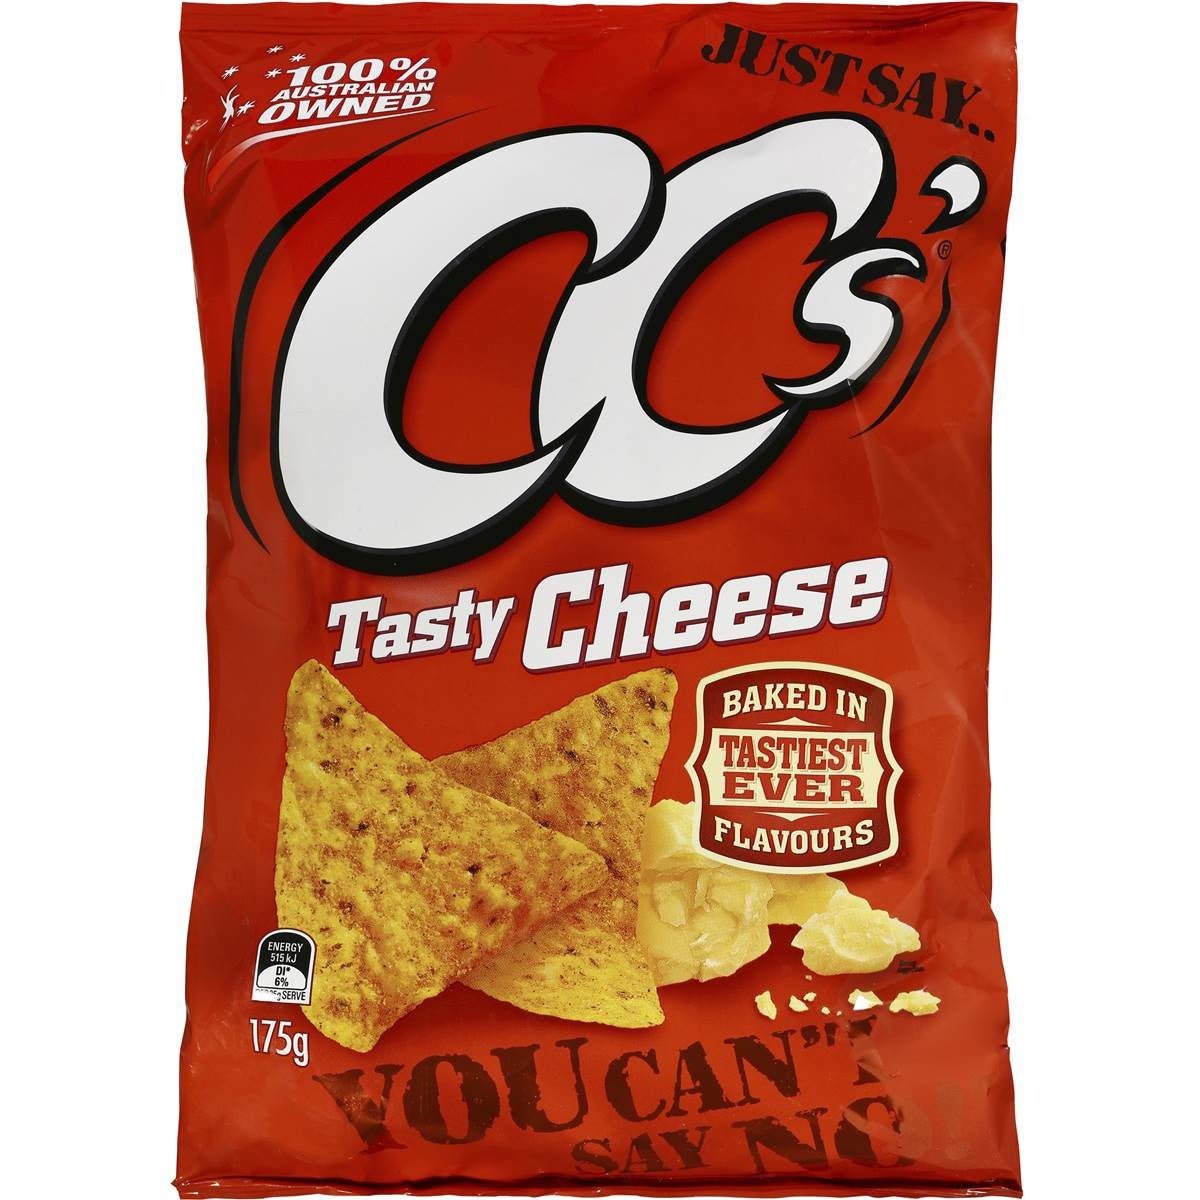 CCs Corn Chips Tasty Cheese 175g